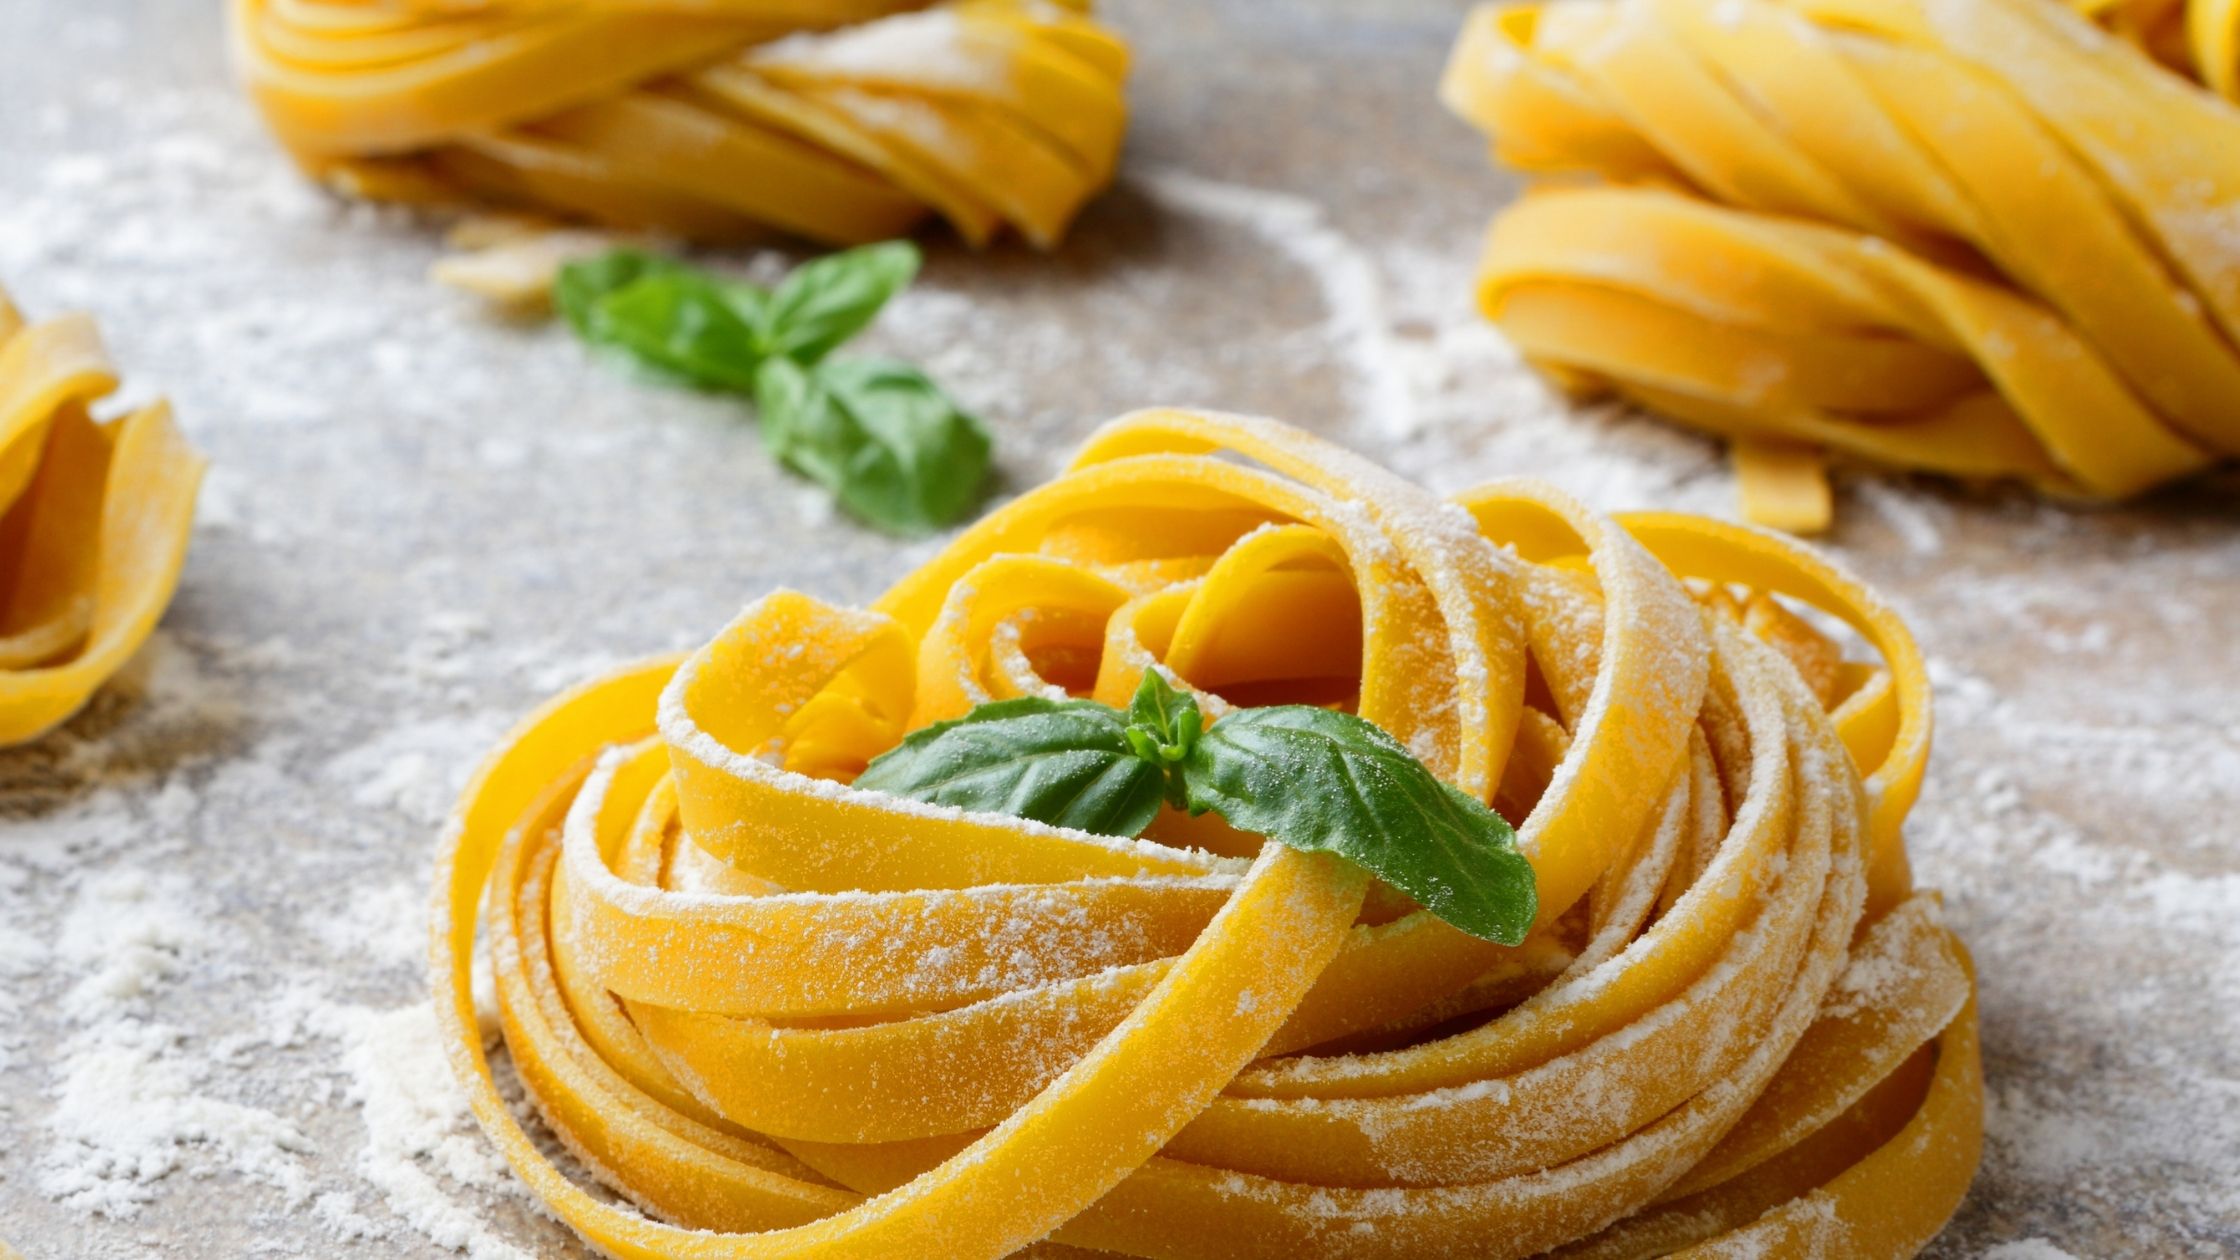 Fresh pasta noodles with basil